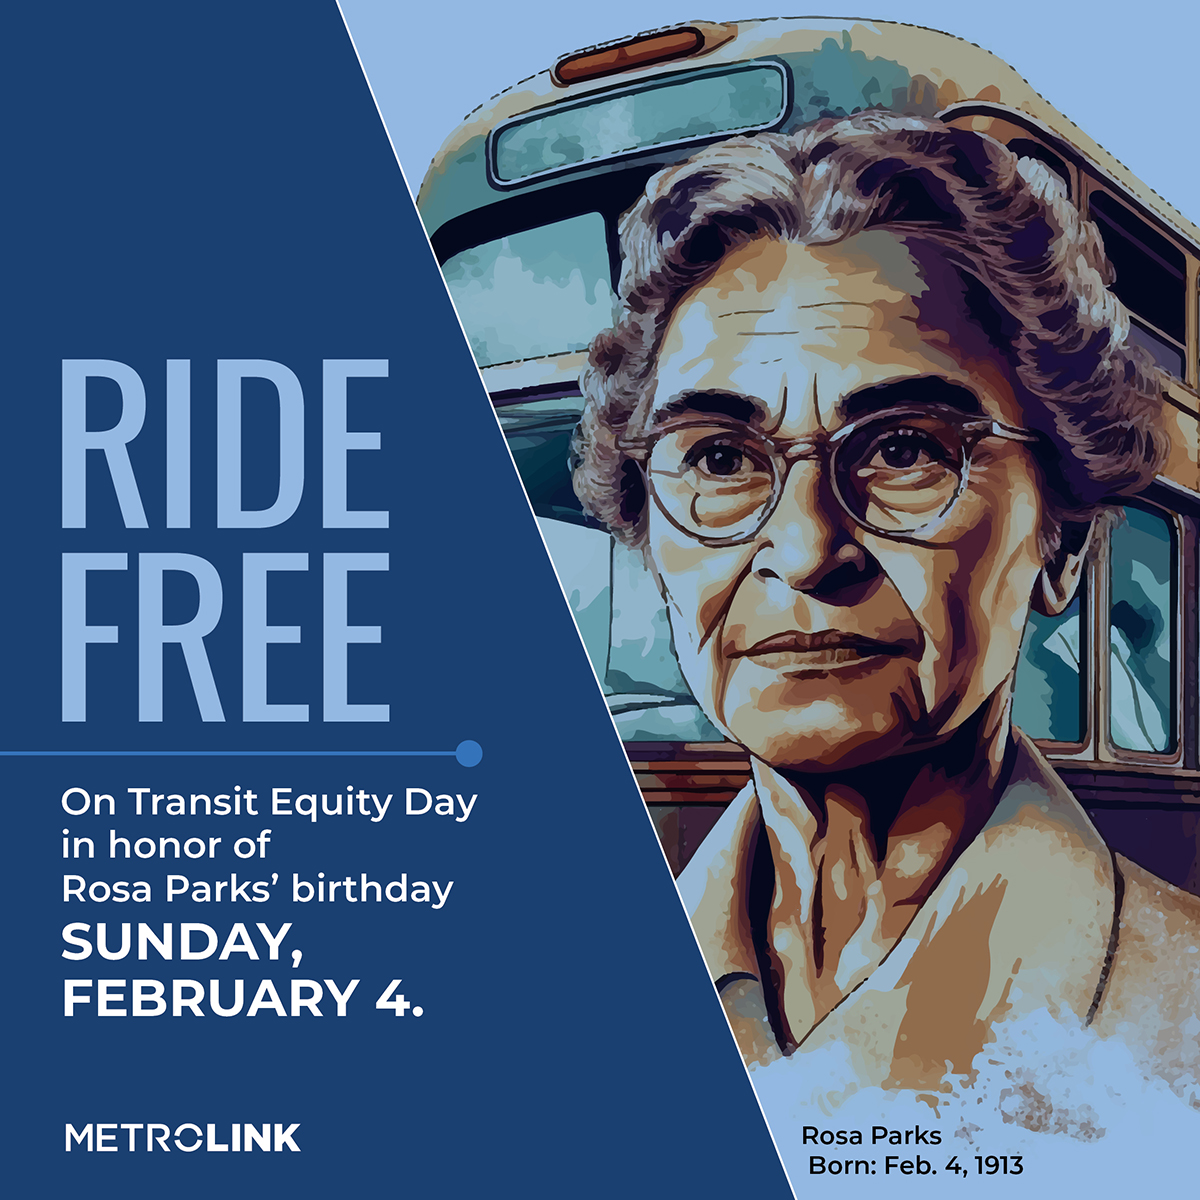 FREE ADMISSION + TRANSPORTATION ON TRANSIT EQUITY DAY – Sunday, February 4th 12 p.m. – 5 p.m.